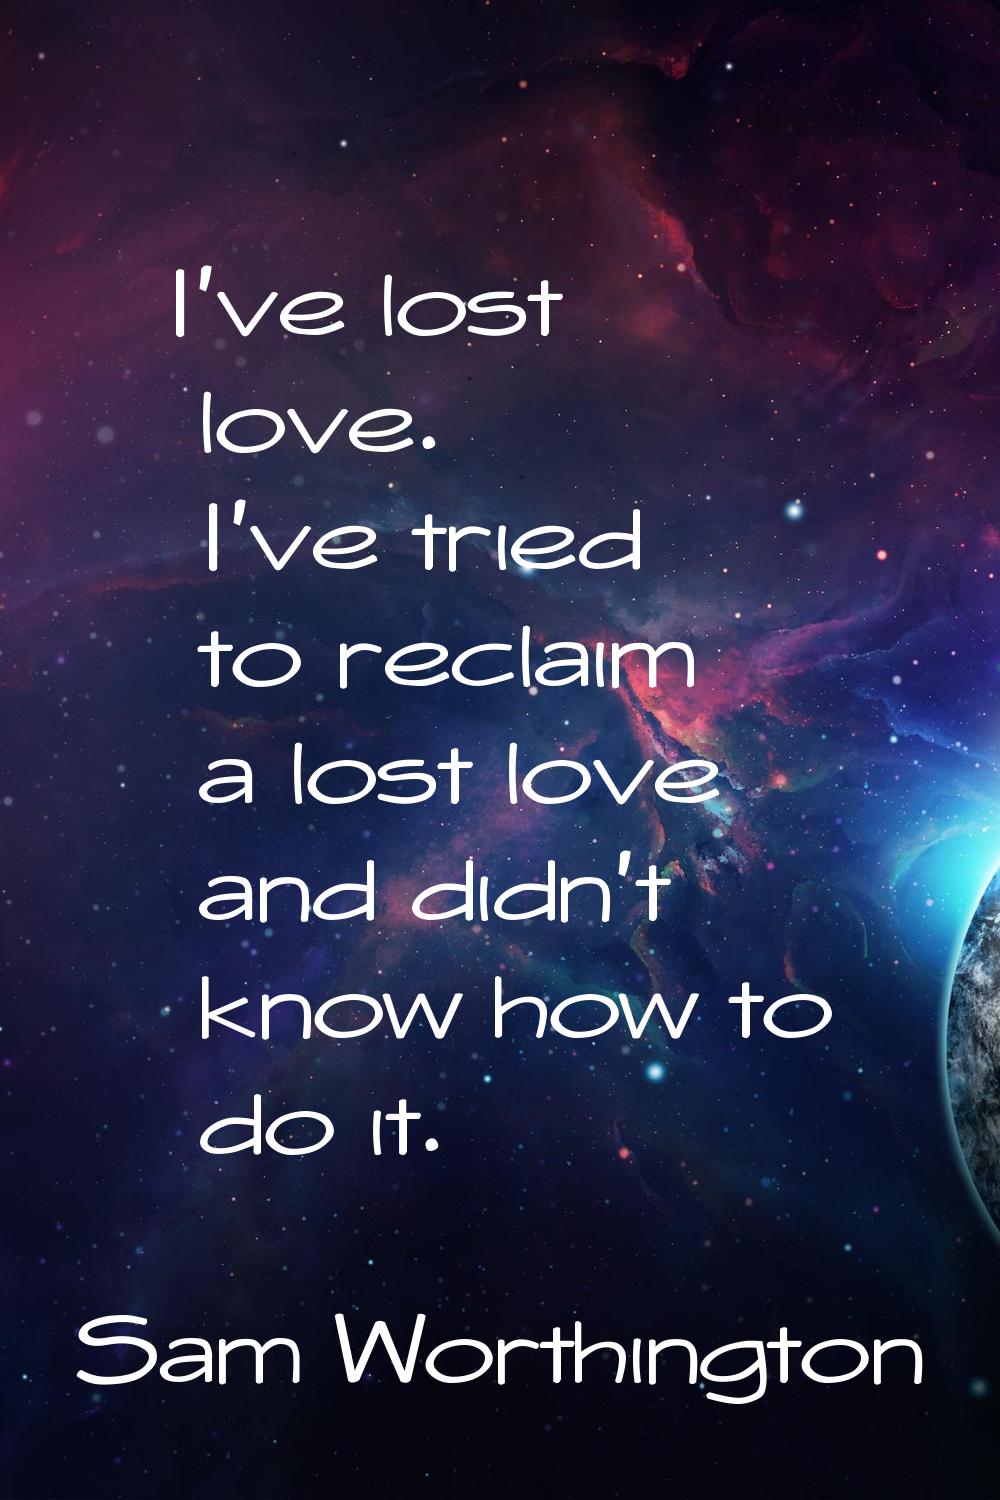 I've lost love. I've tried to reclaim a lost love and didn't know how to do it.